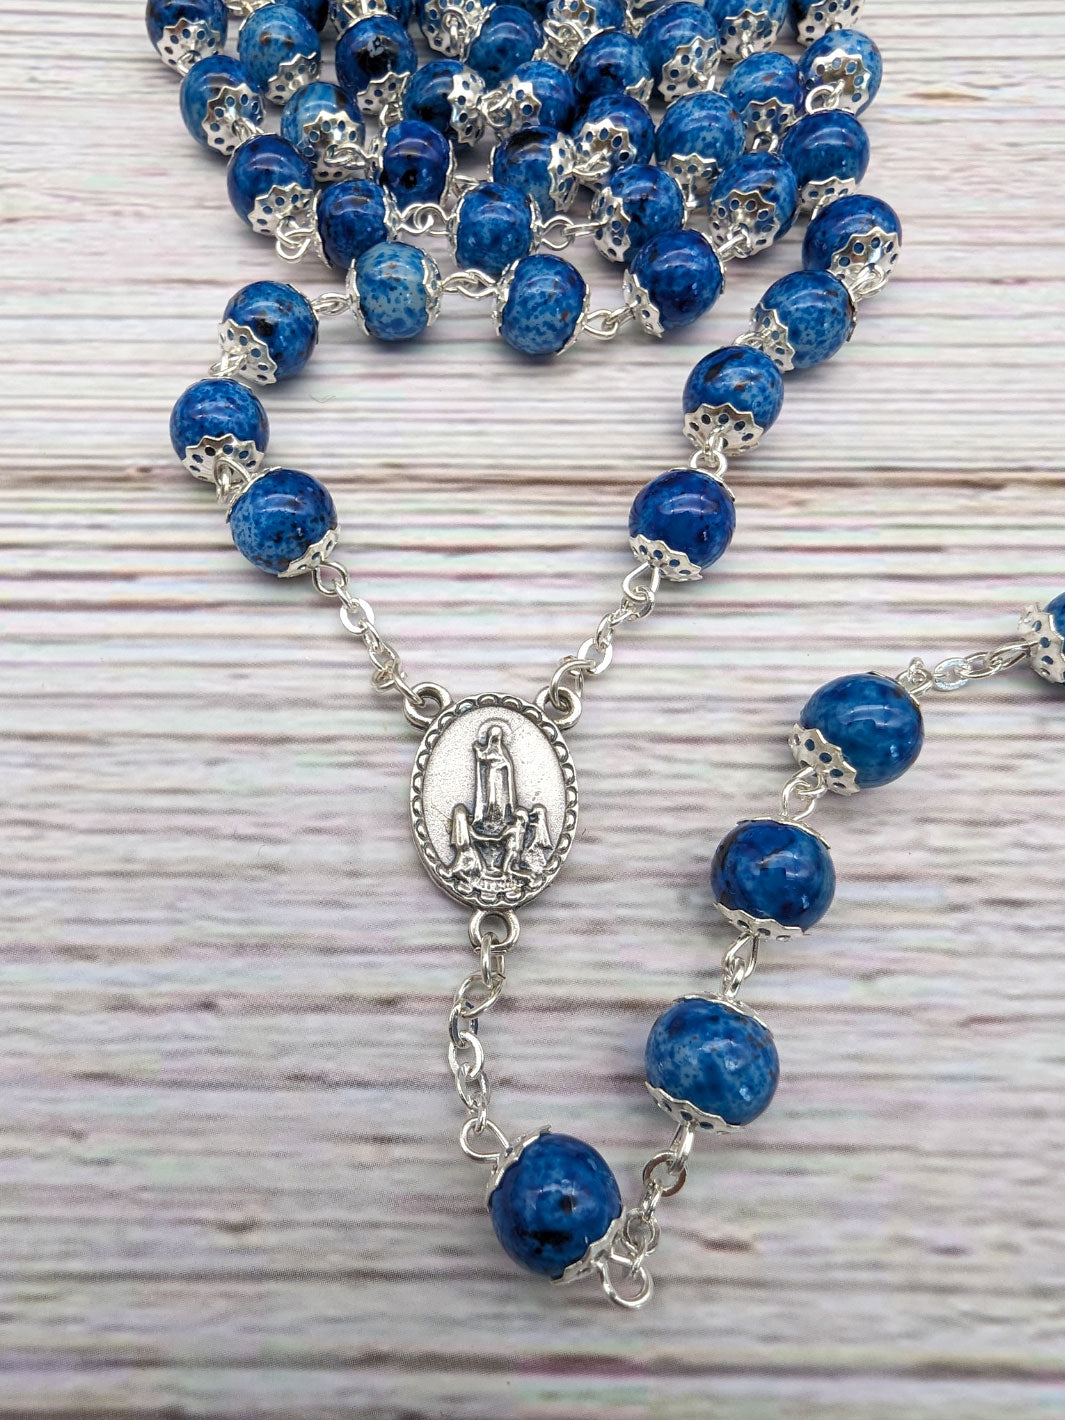 Handmade 8mm Blue Stained Glass Beads Our Lady of Fatima Rosary